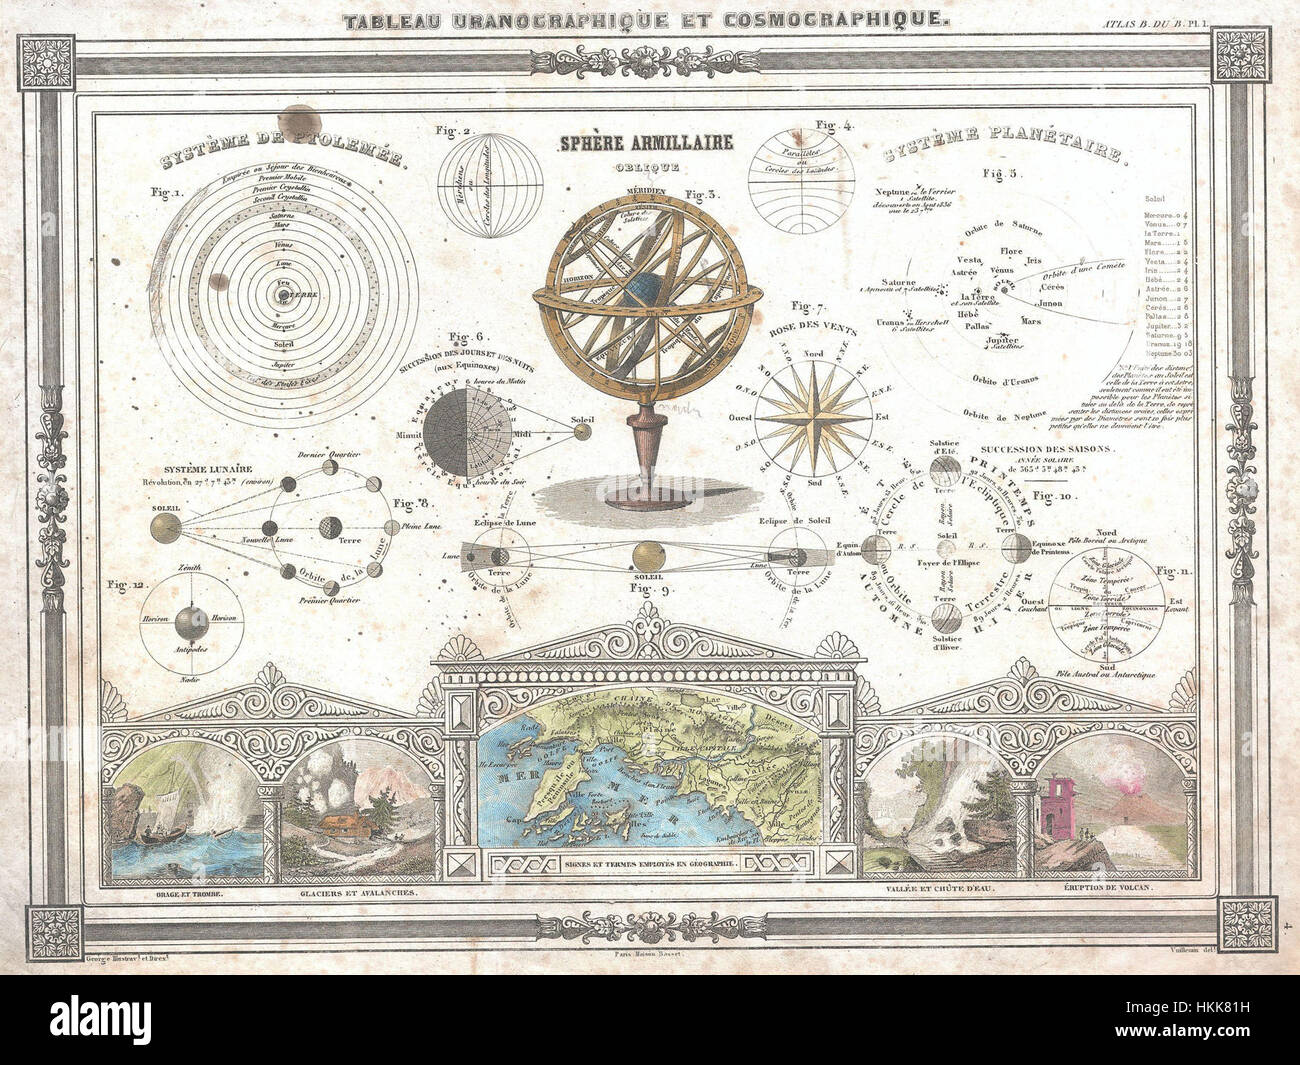 1852 Vuillemin Astronomical and Cosmographical Chart - Geographicus - Cosmographique-vuillemin-1852 Stock Photo